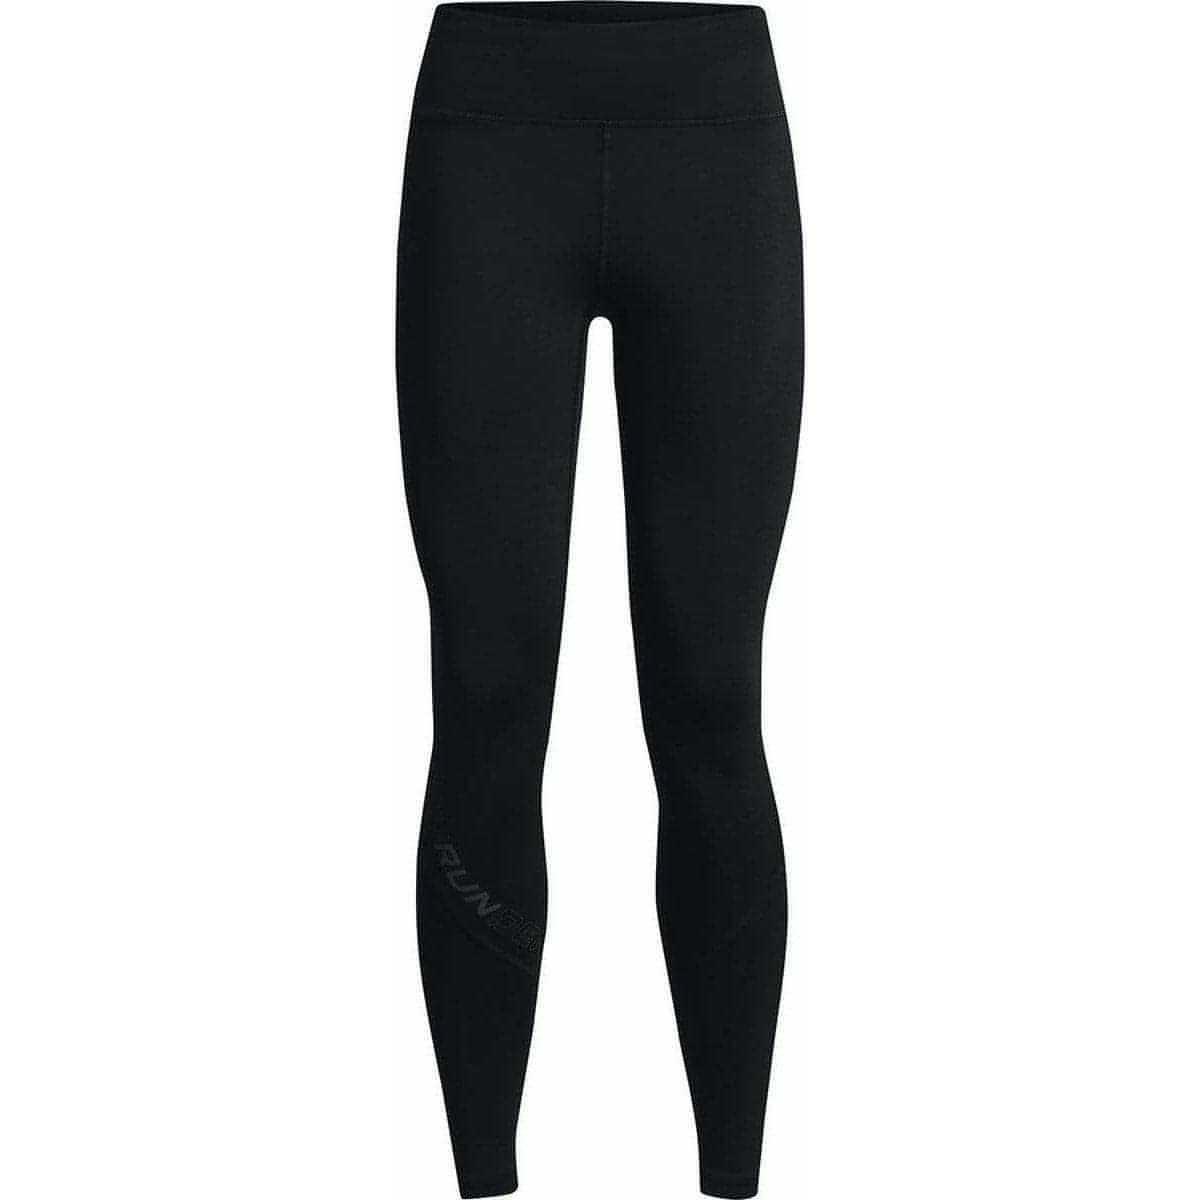 Under Armour Empowered Womens Long Running Tights - Black - Start Fitness